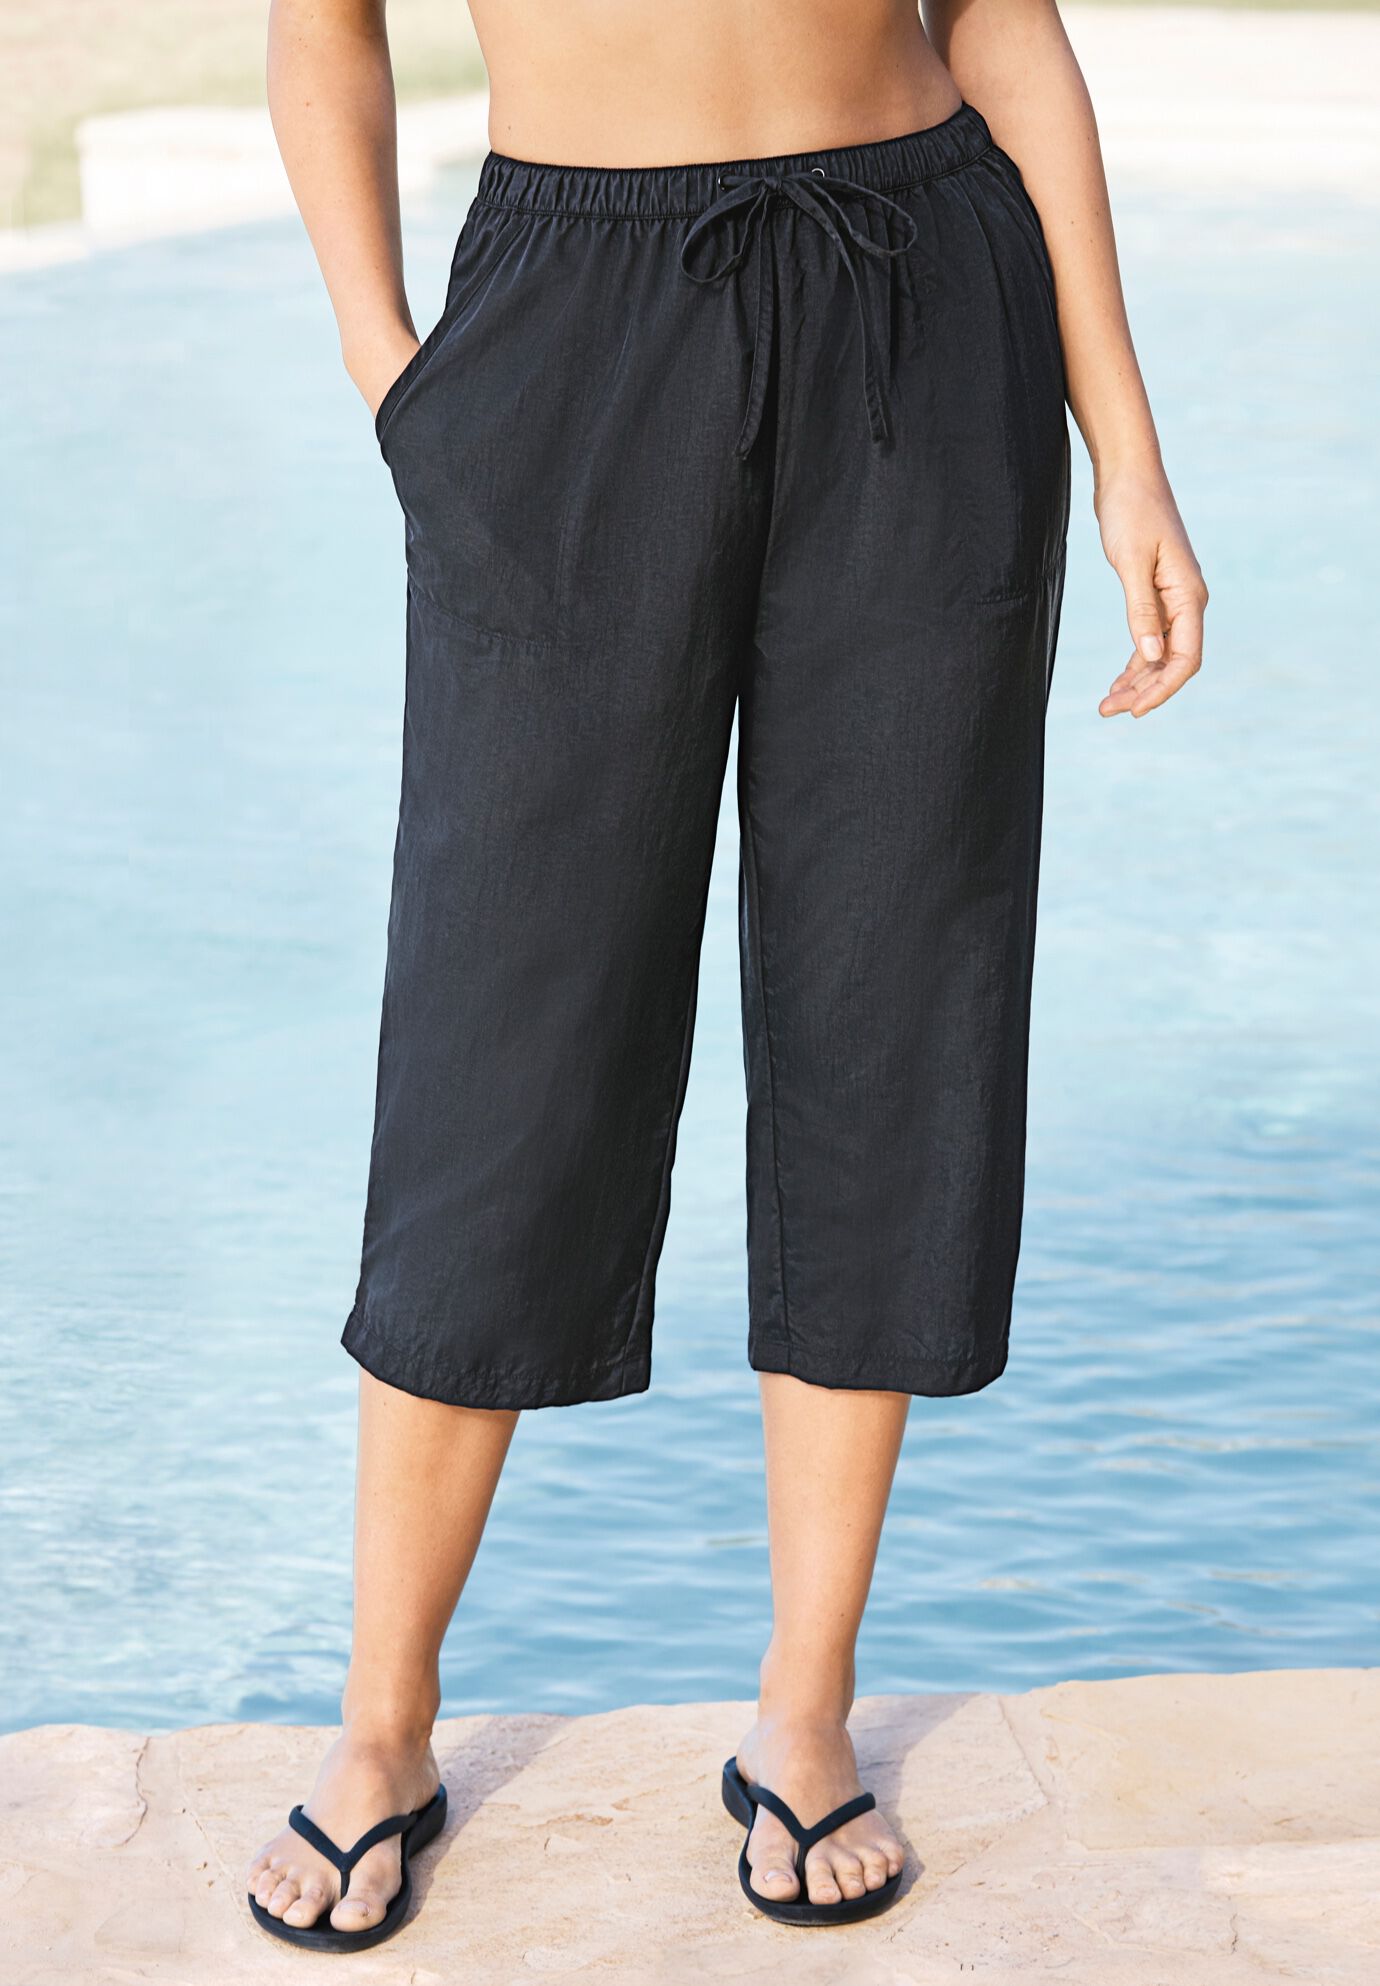 The Best Swim Pants and Modest Swimwear for Total Body Confidence